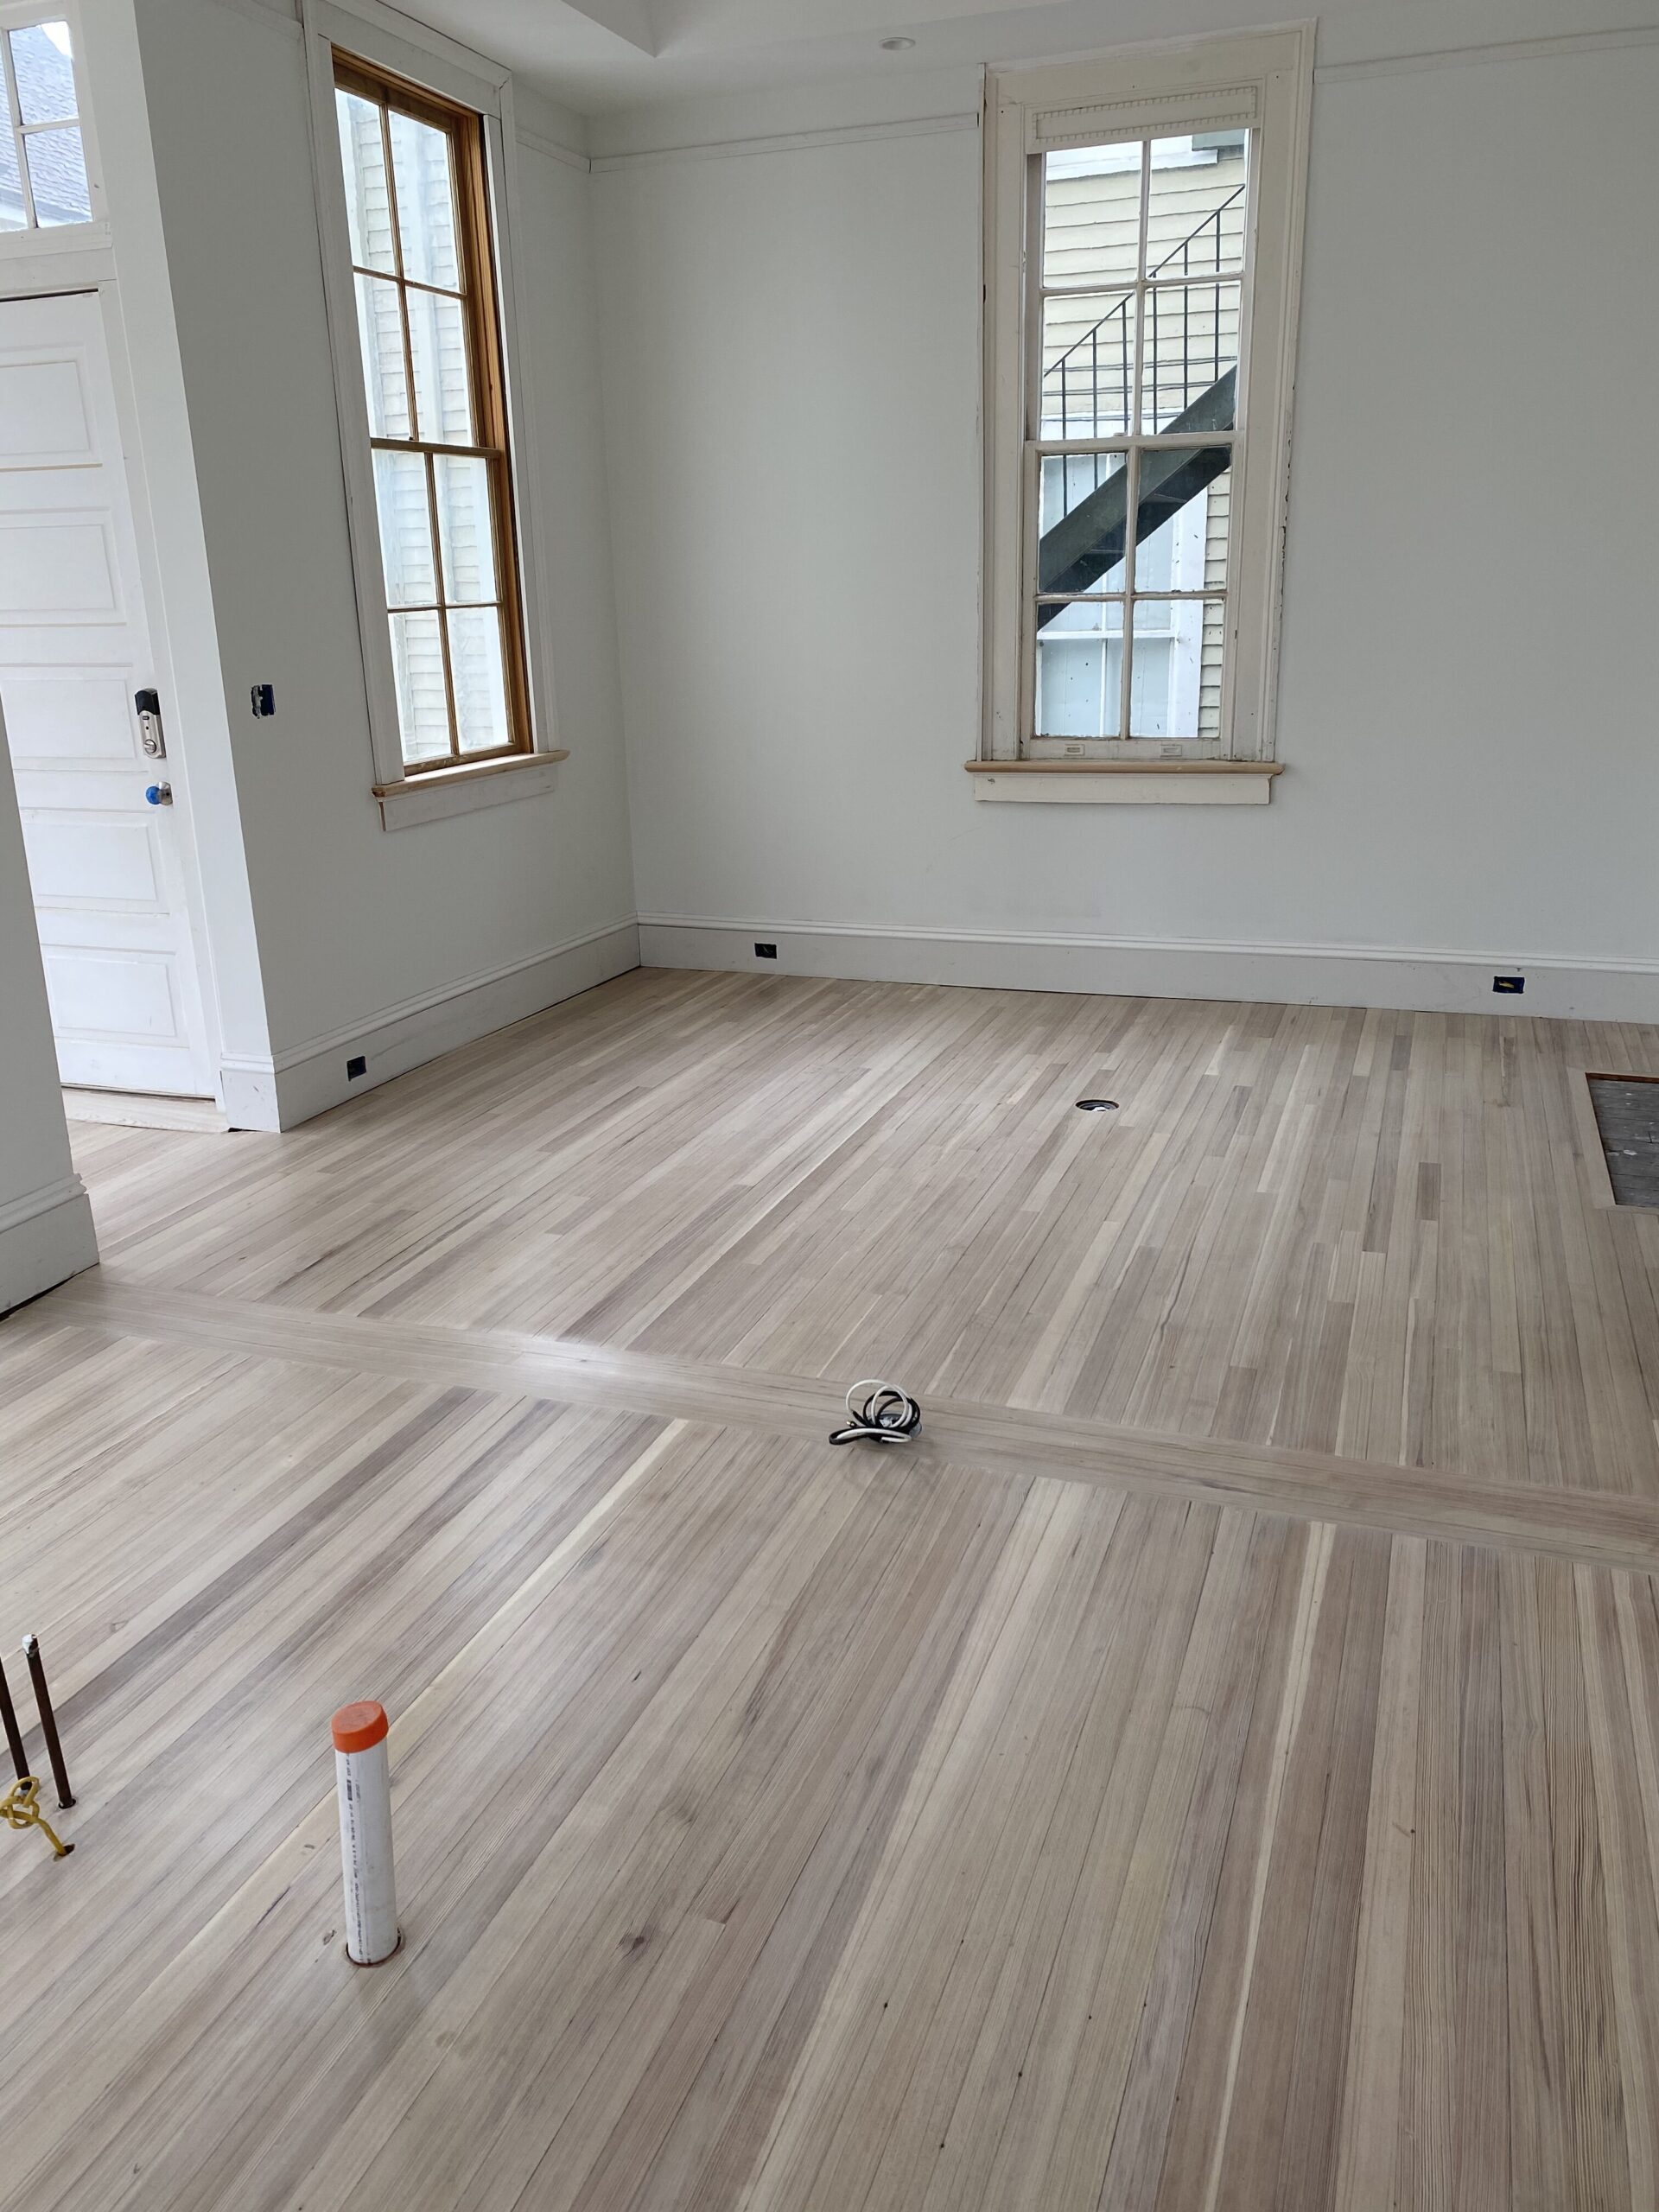 Beautiful white wash finish red heart of pine hardwood flooring in a den area with white walls